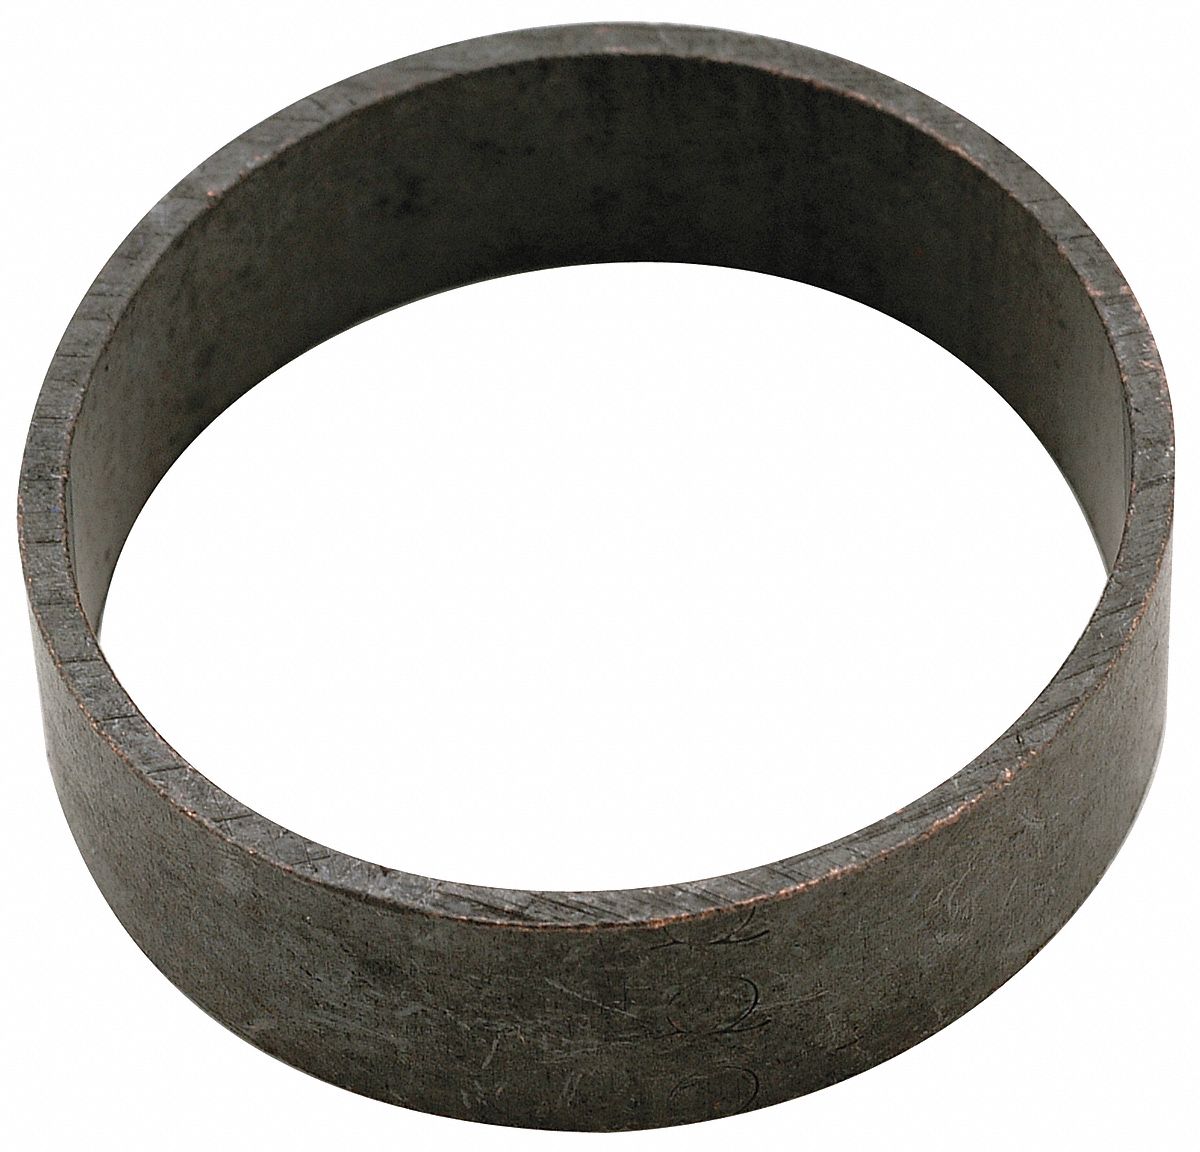 Copper Crimp Clamp Ring, Clamp Connection Type, 1